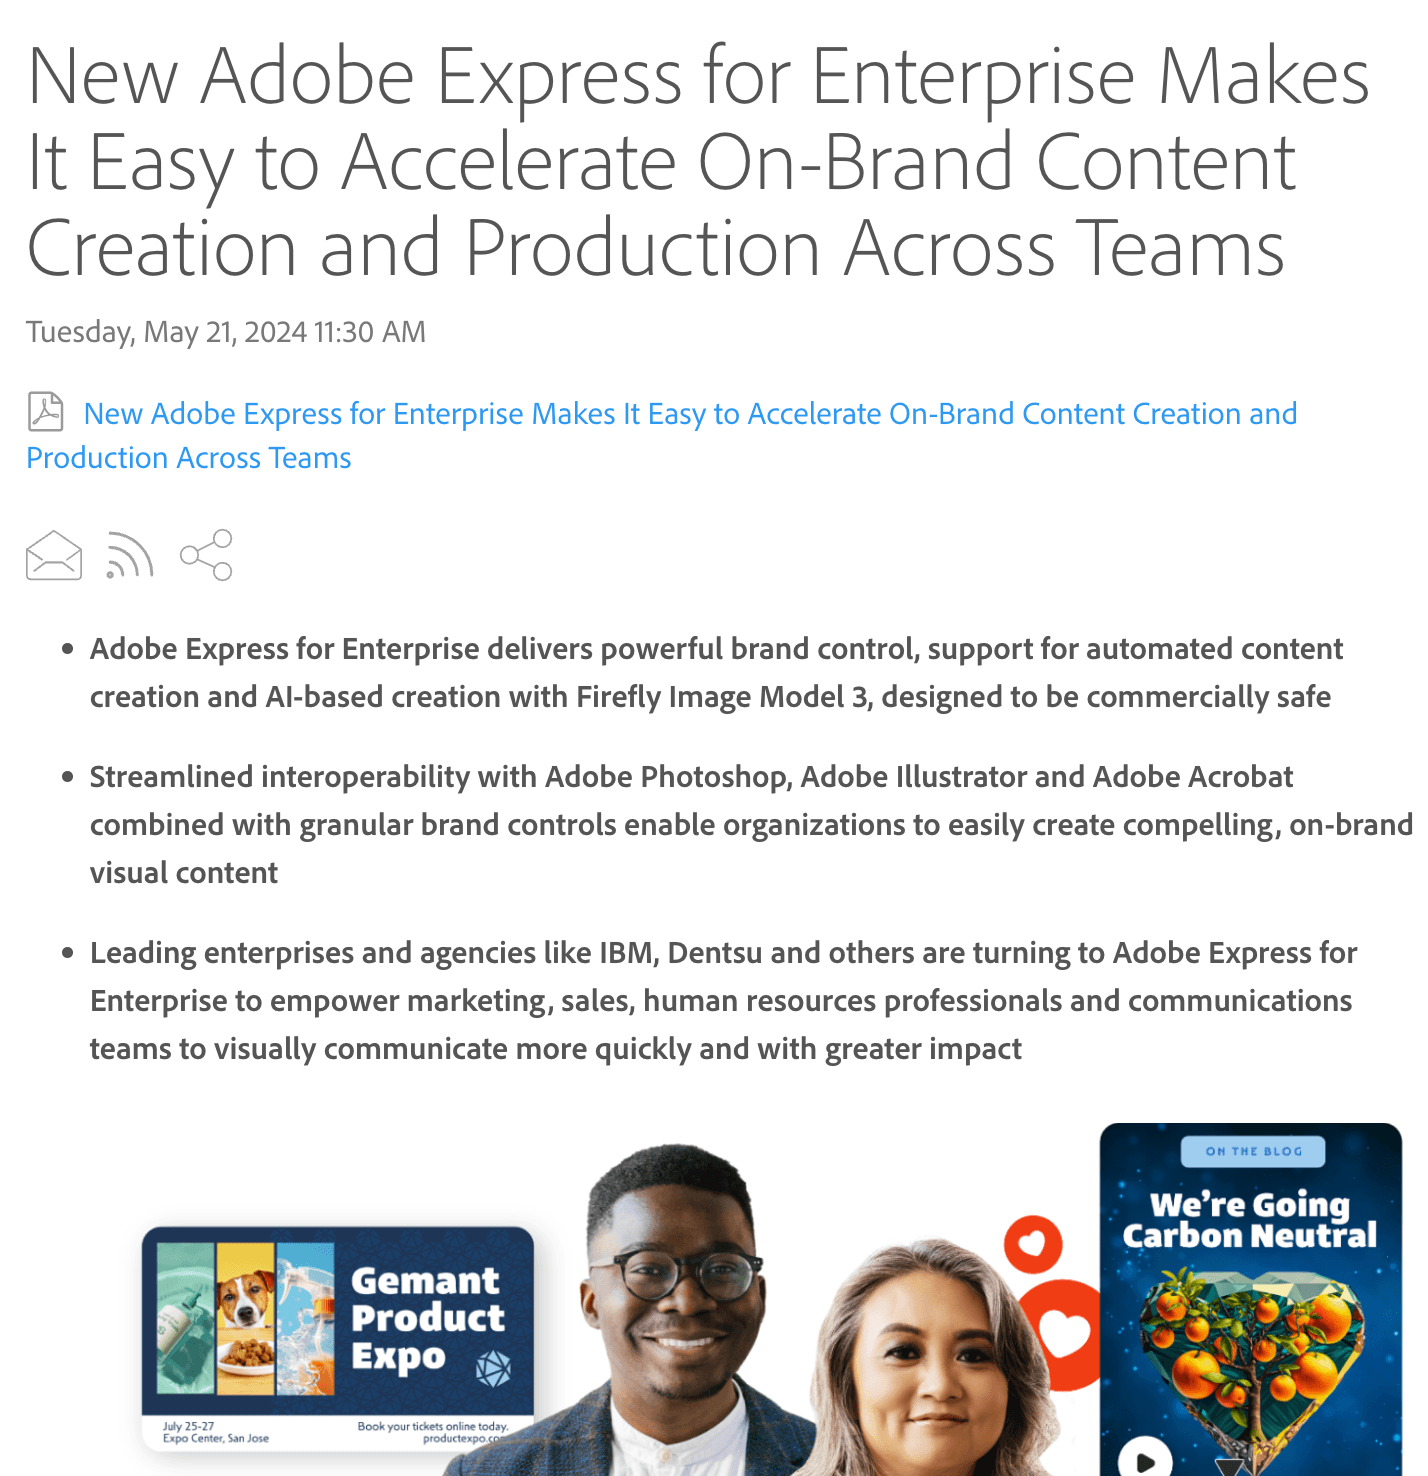 New product launch press release example: Adobe